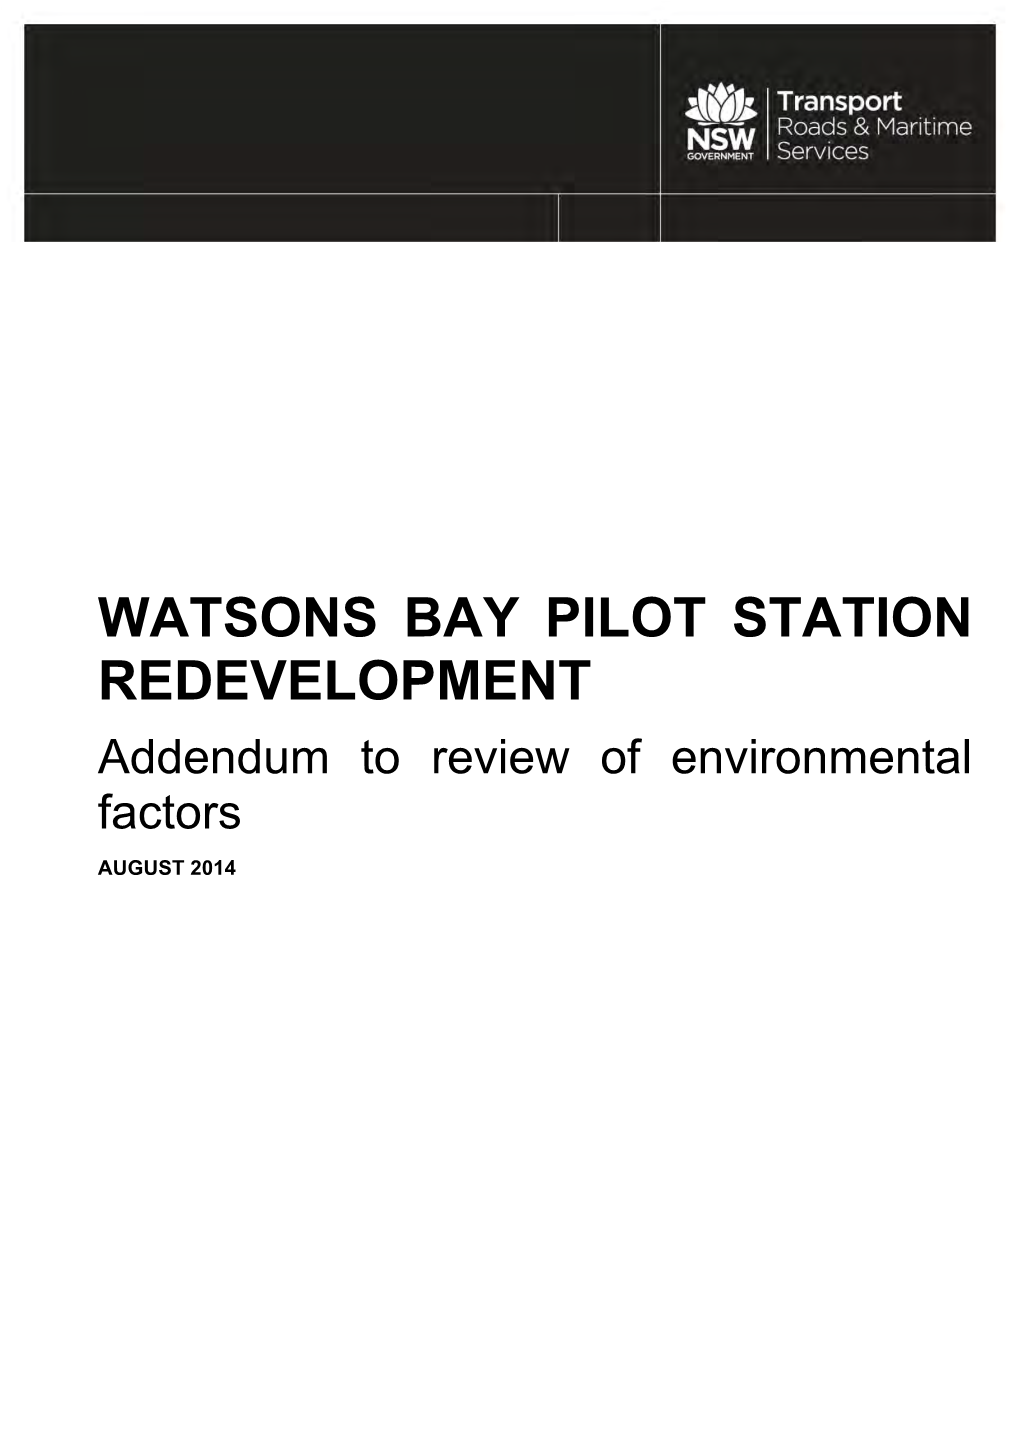 WATSONS BAY PILOT STATION REDEVELOPMENT Addendum to Review of Environmental Factors AUGUST 2014